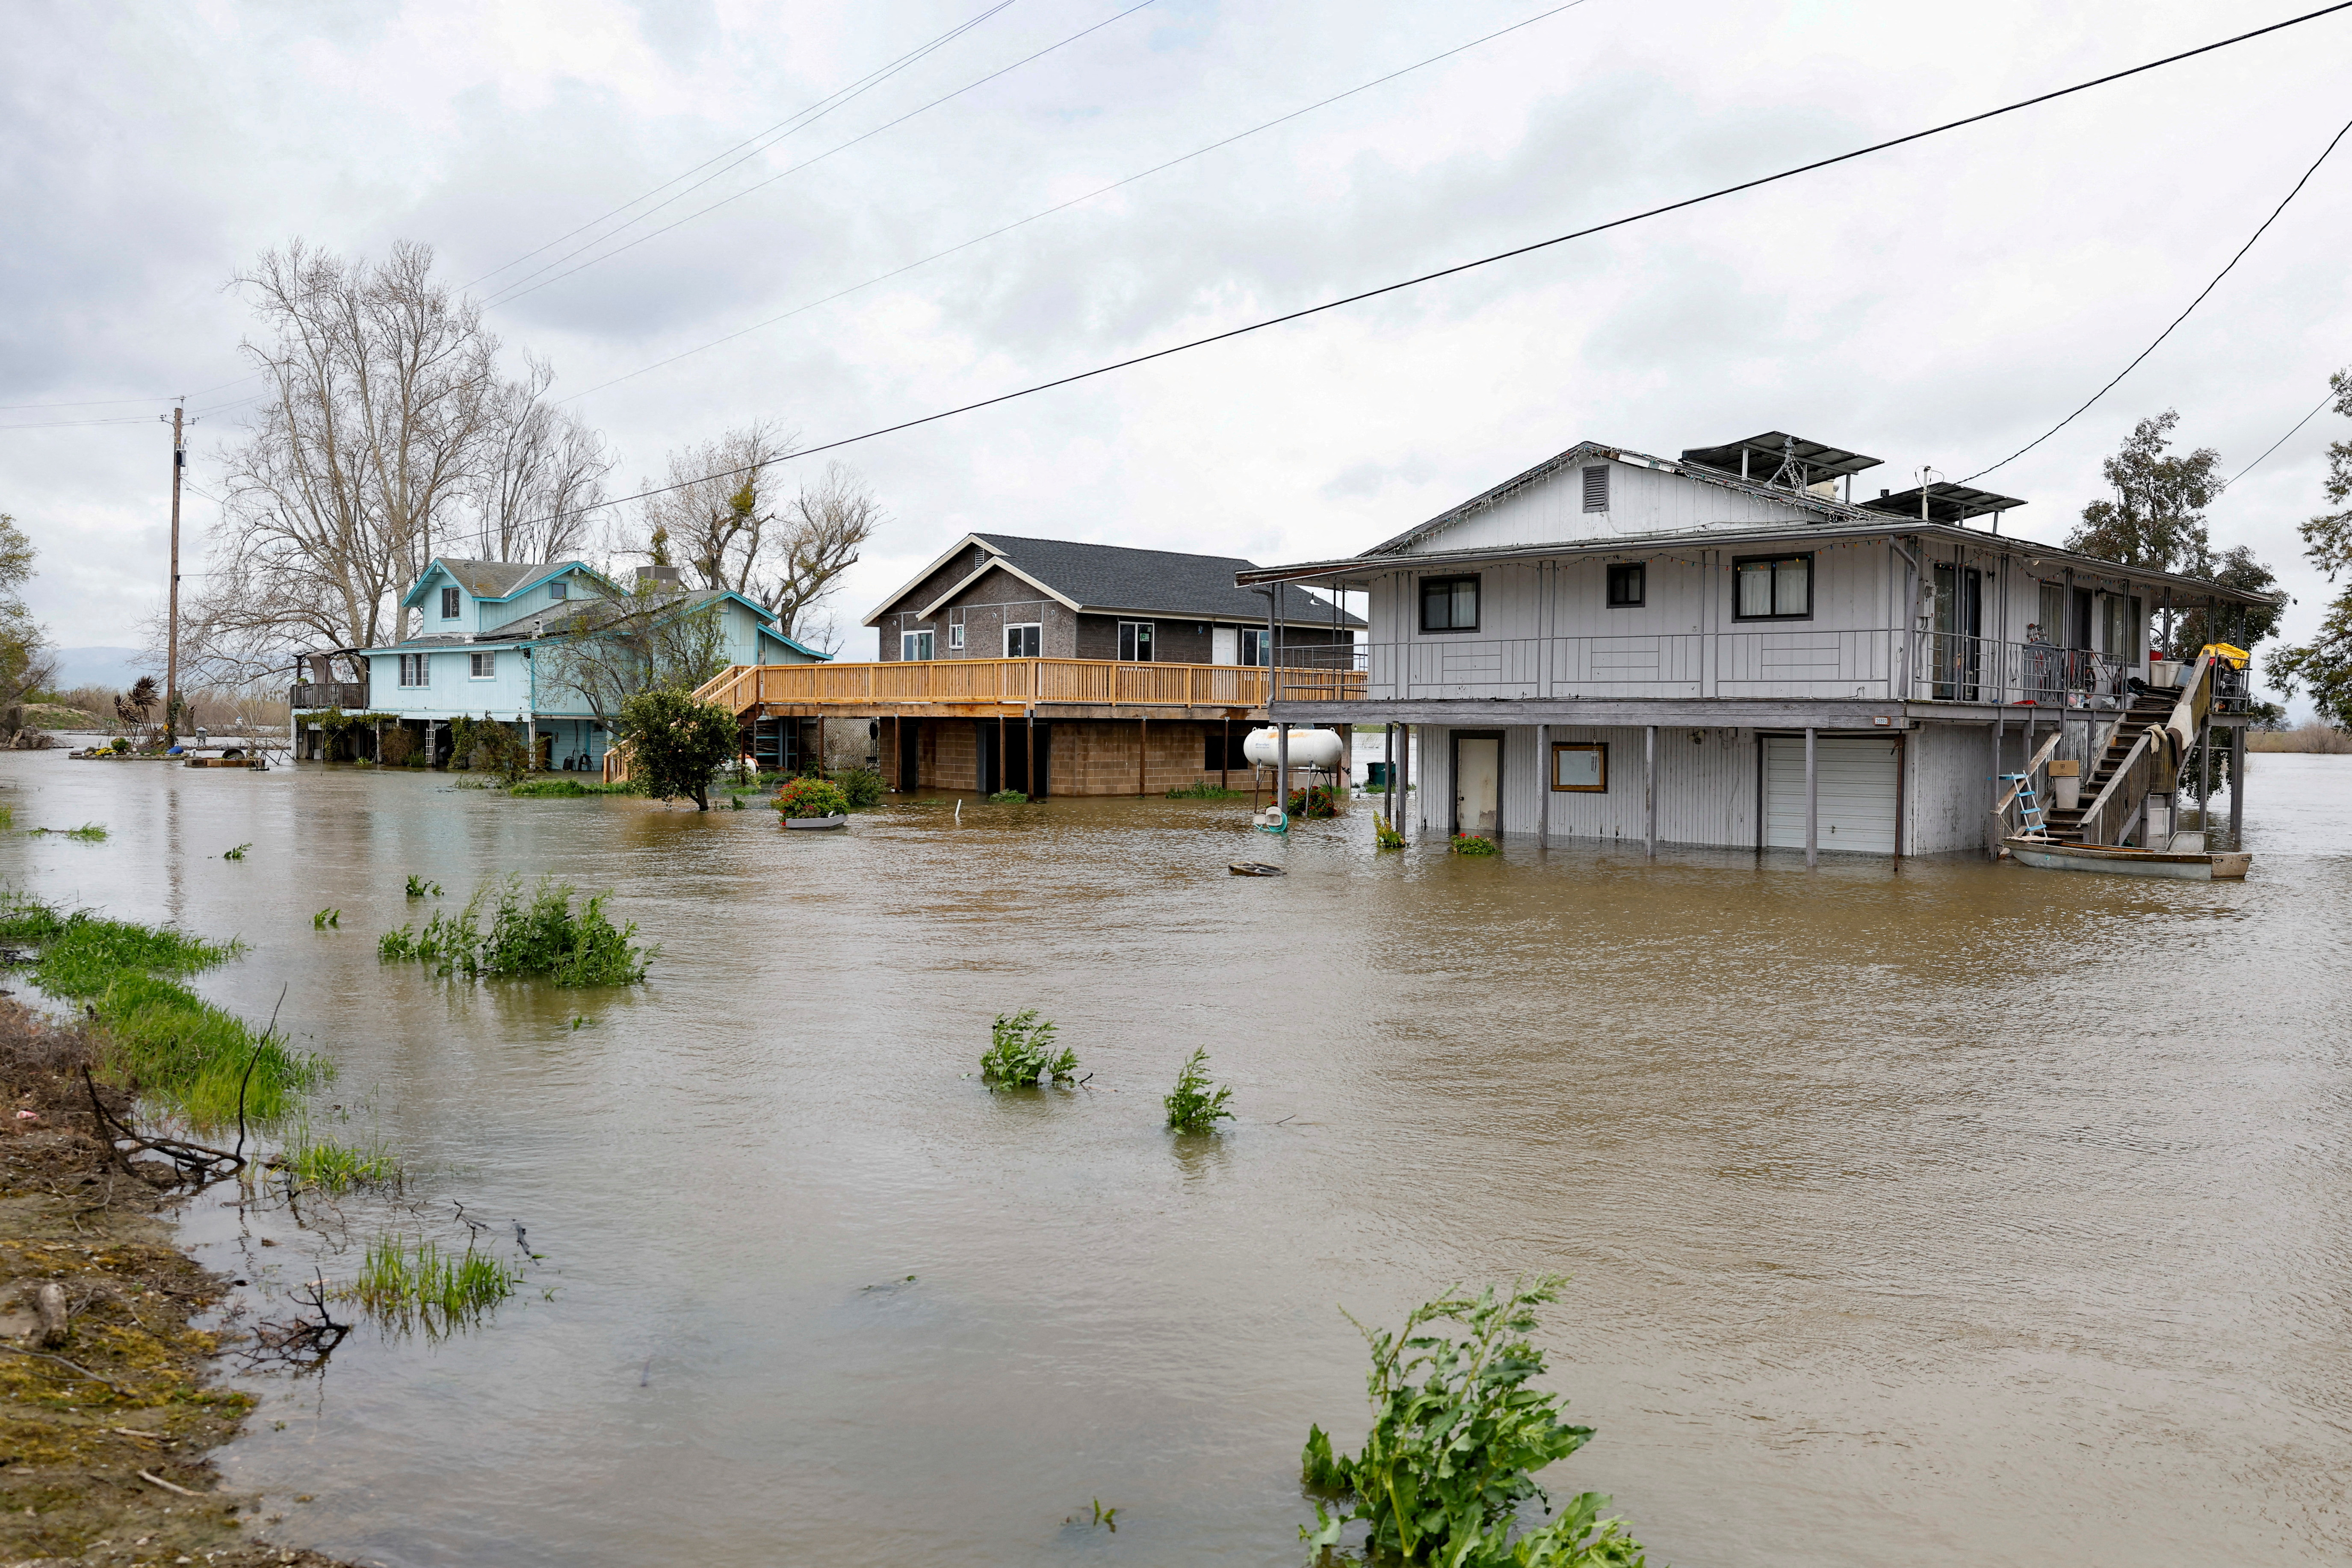 Houses sit partly underwater after the San Joaquin River overflowed, in Manteca